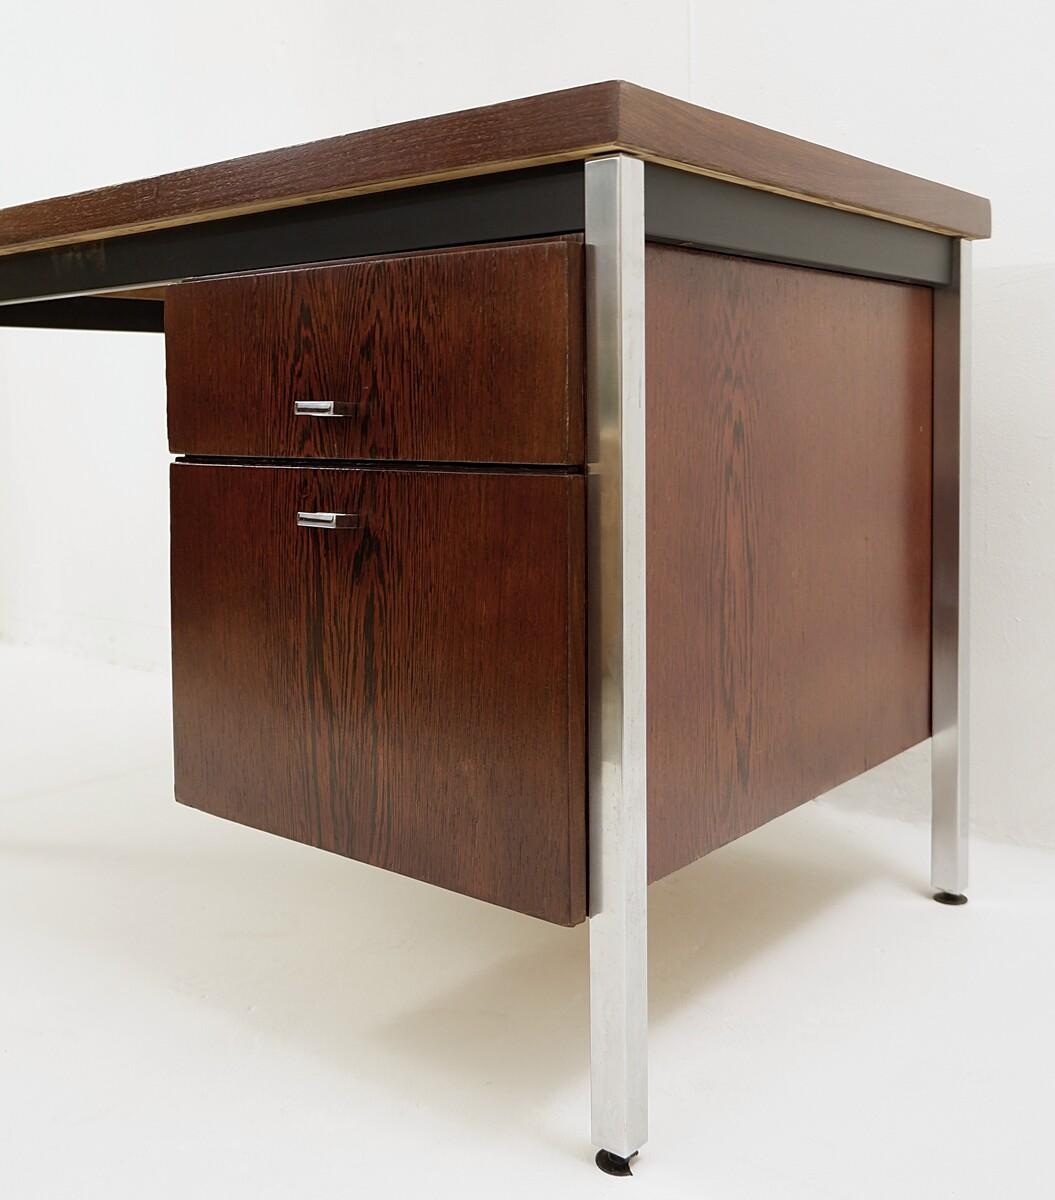 A simple and beautiful iconic Wenge desk.